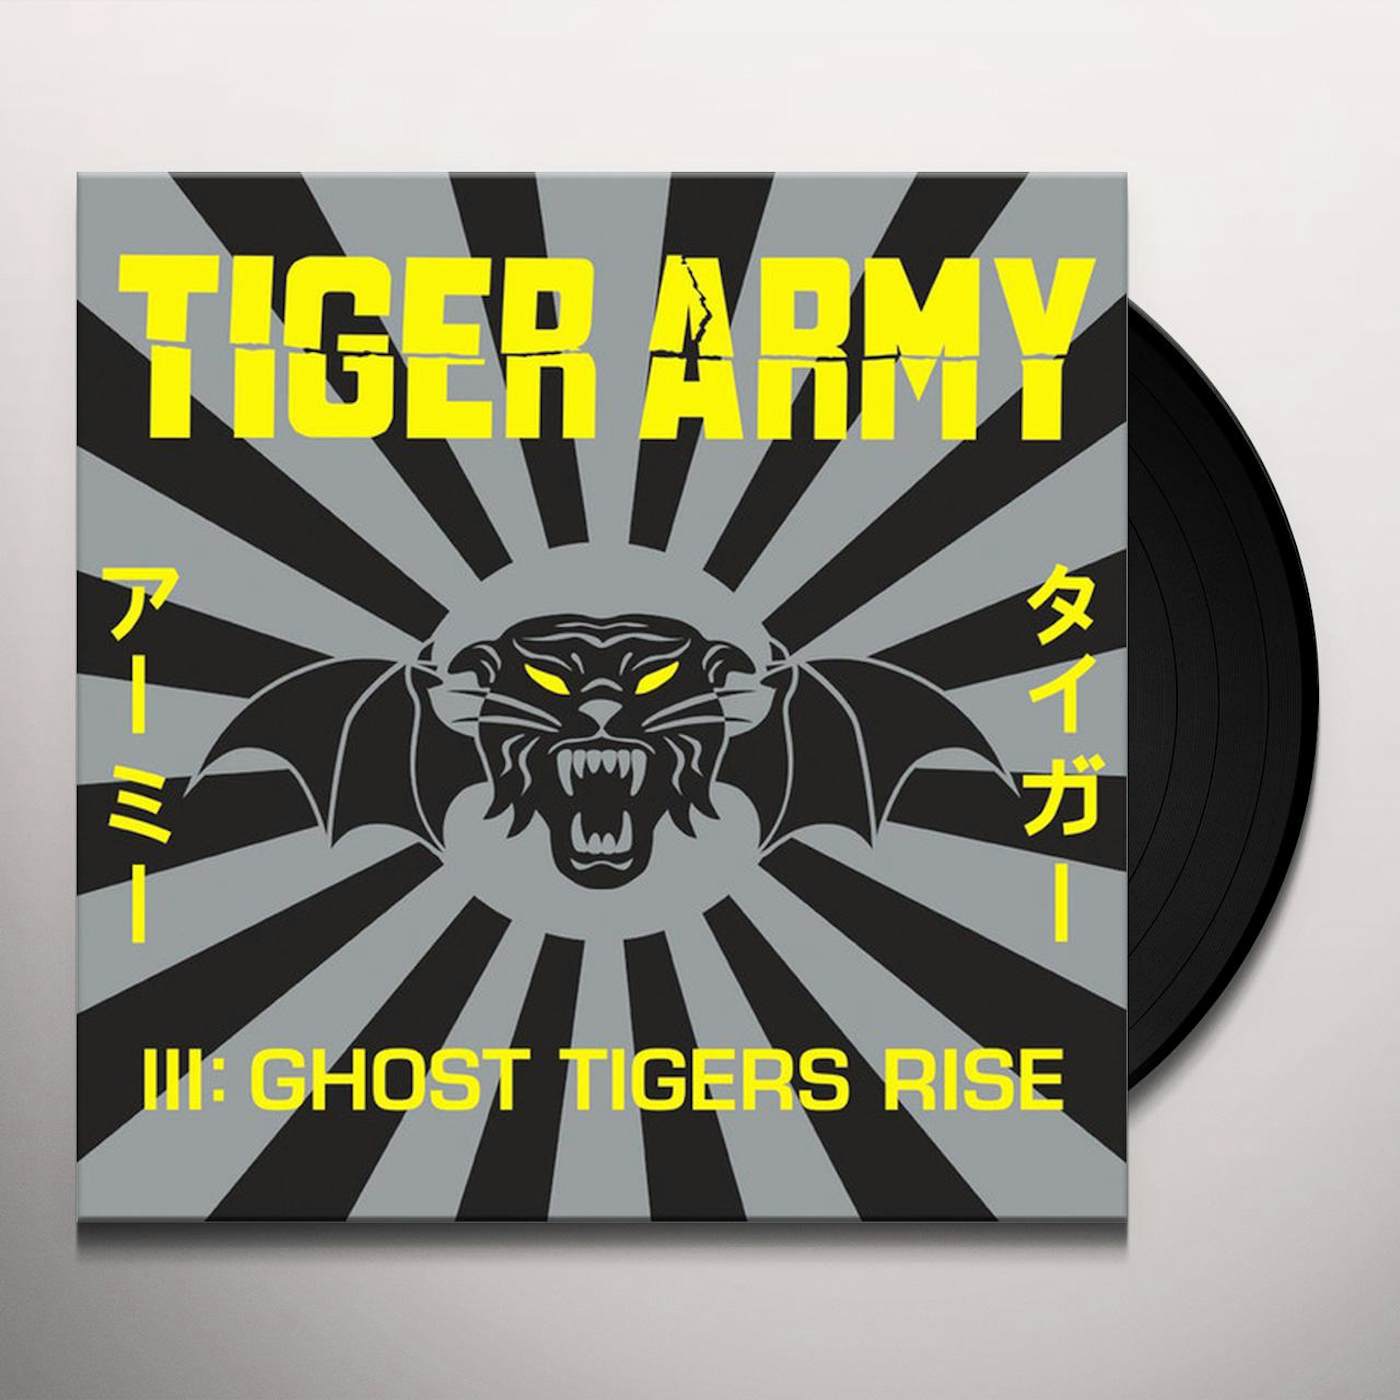 Tiger Army Iii: Ghost Tigers Rise Vinyl Record